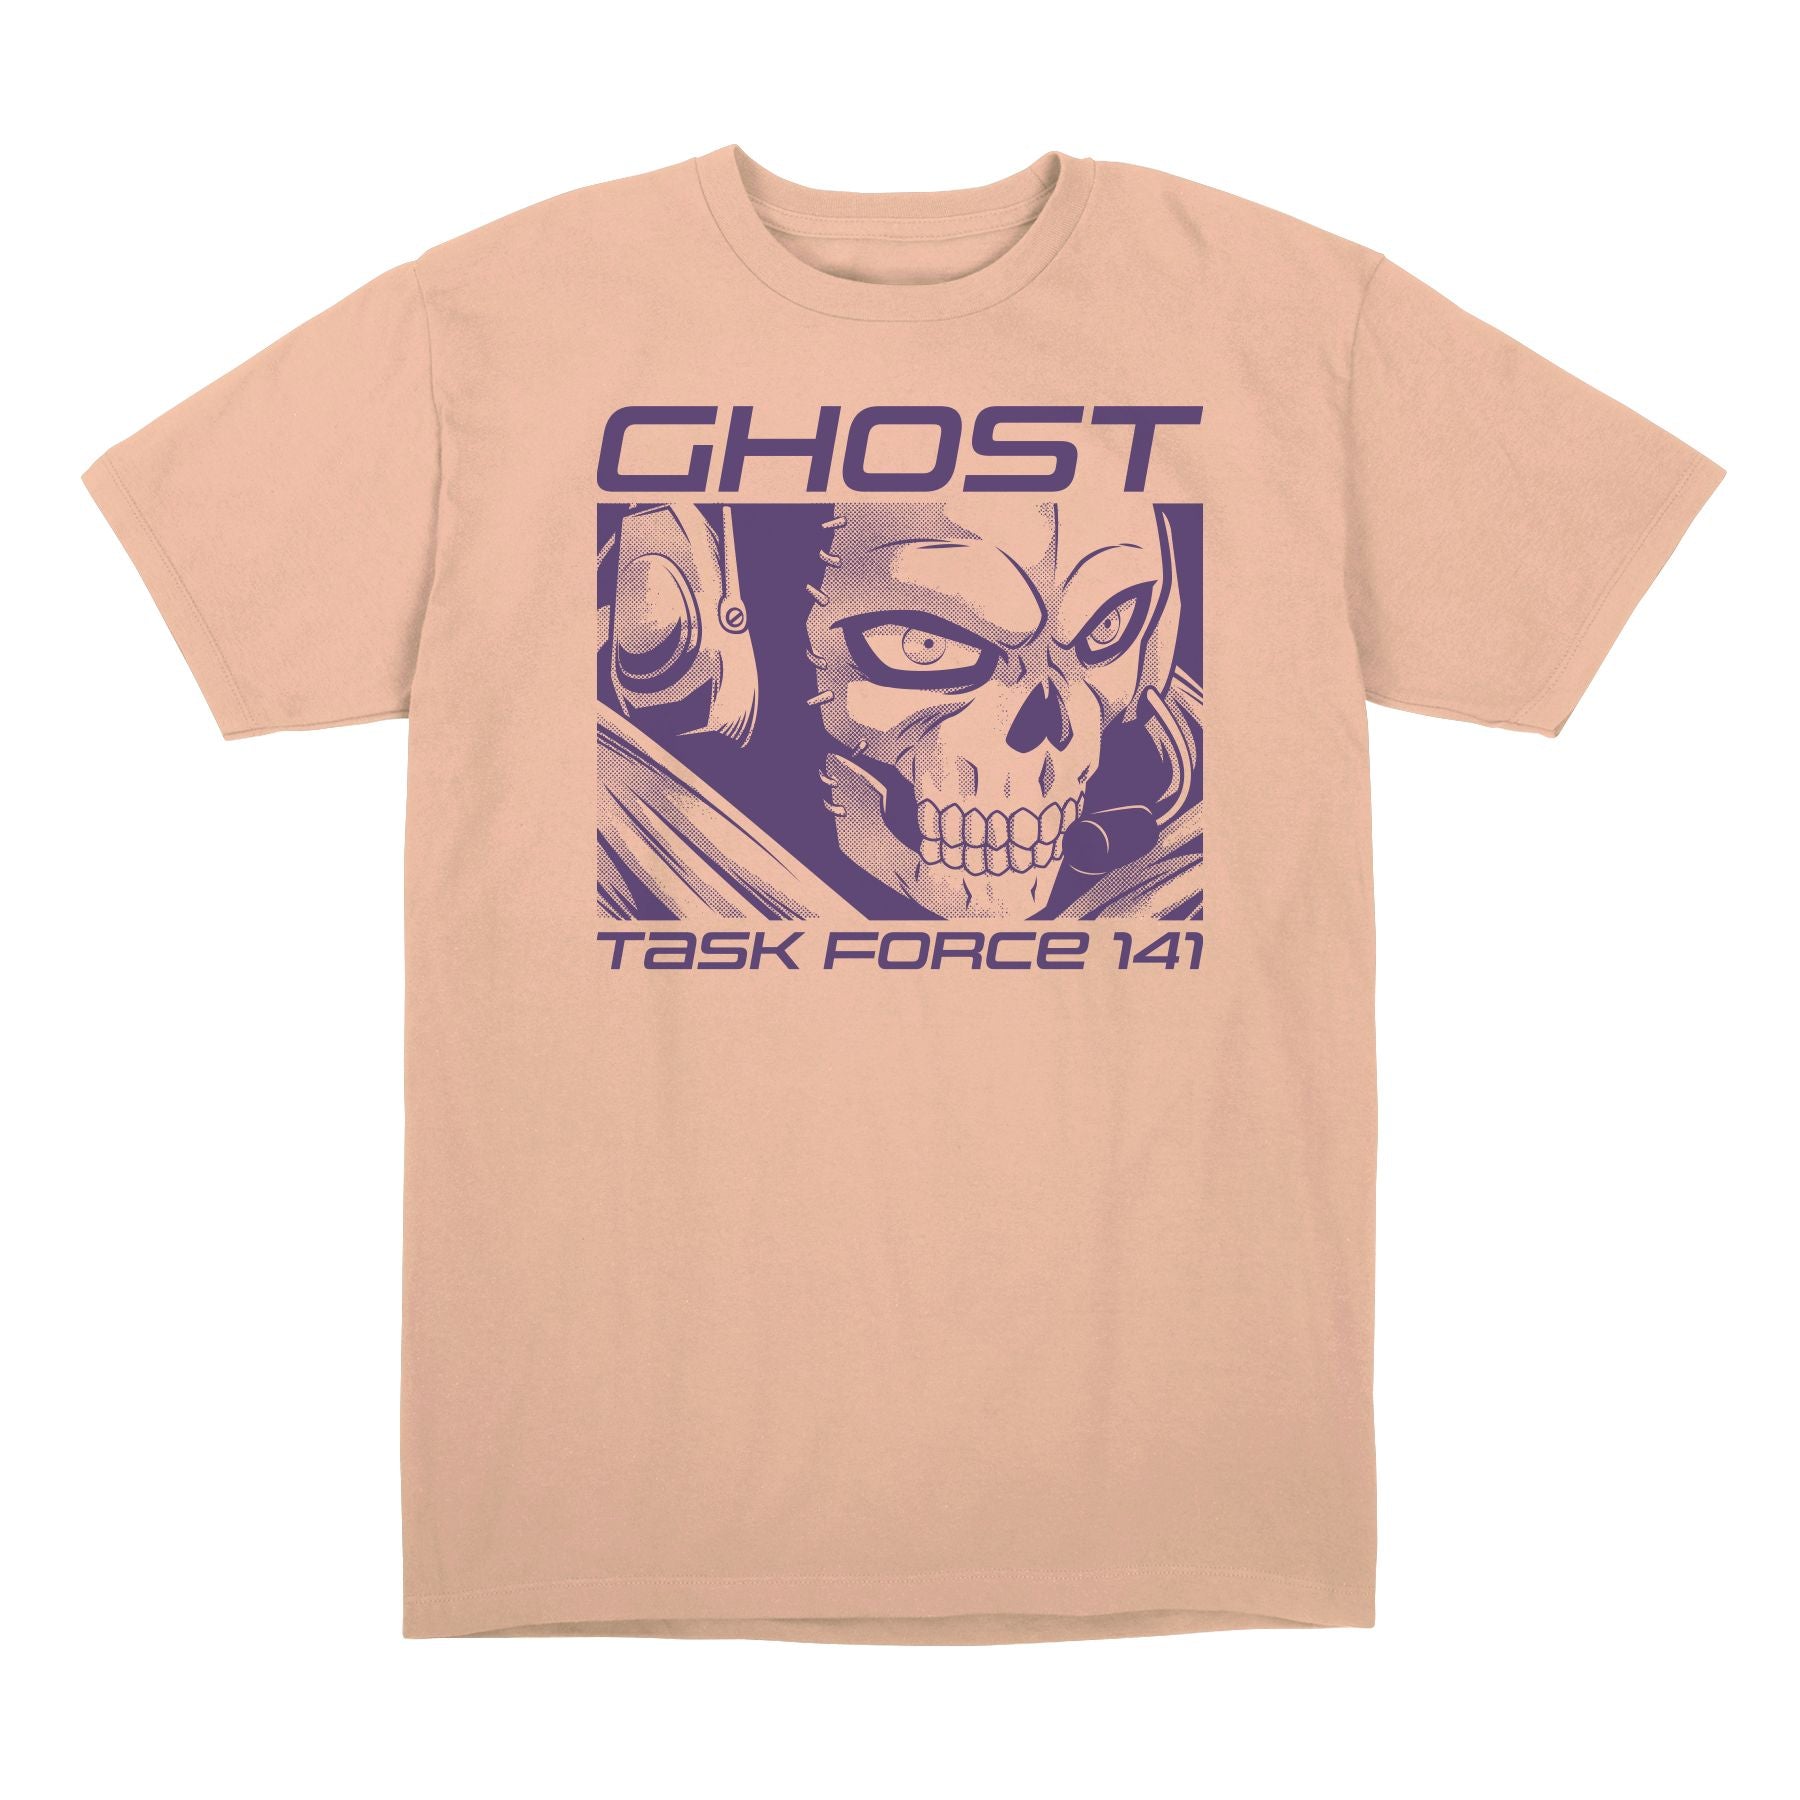 Call of Duty Sand Anime Ghost T-Shirt